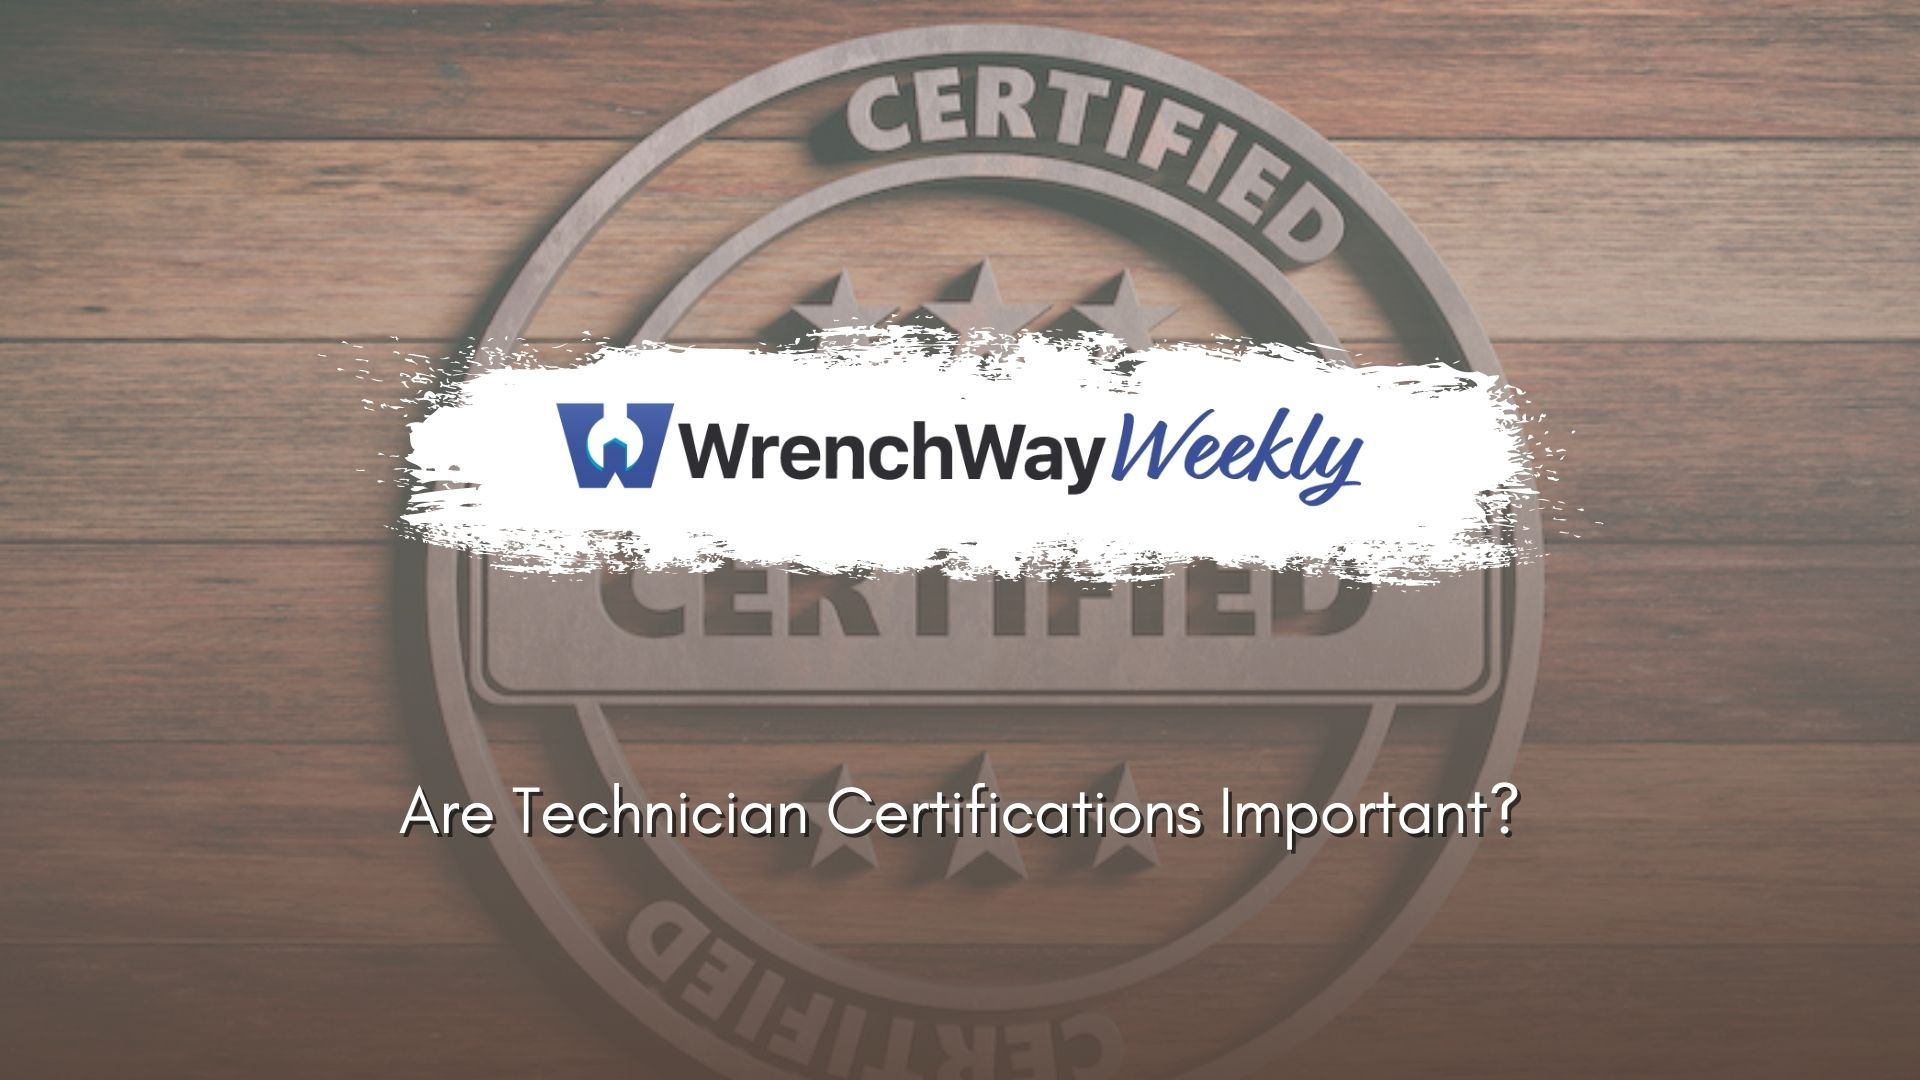 wrenchway weekly episode on are technician certifications important?